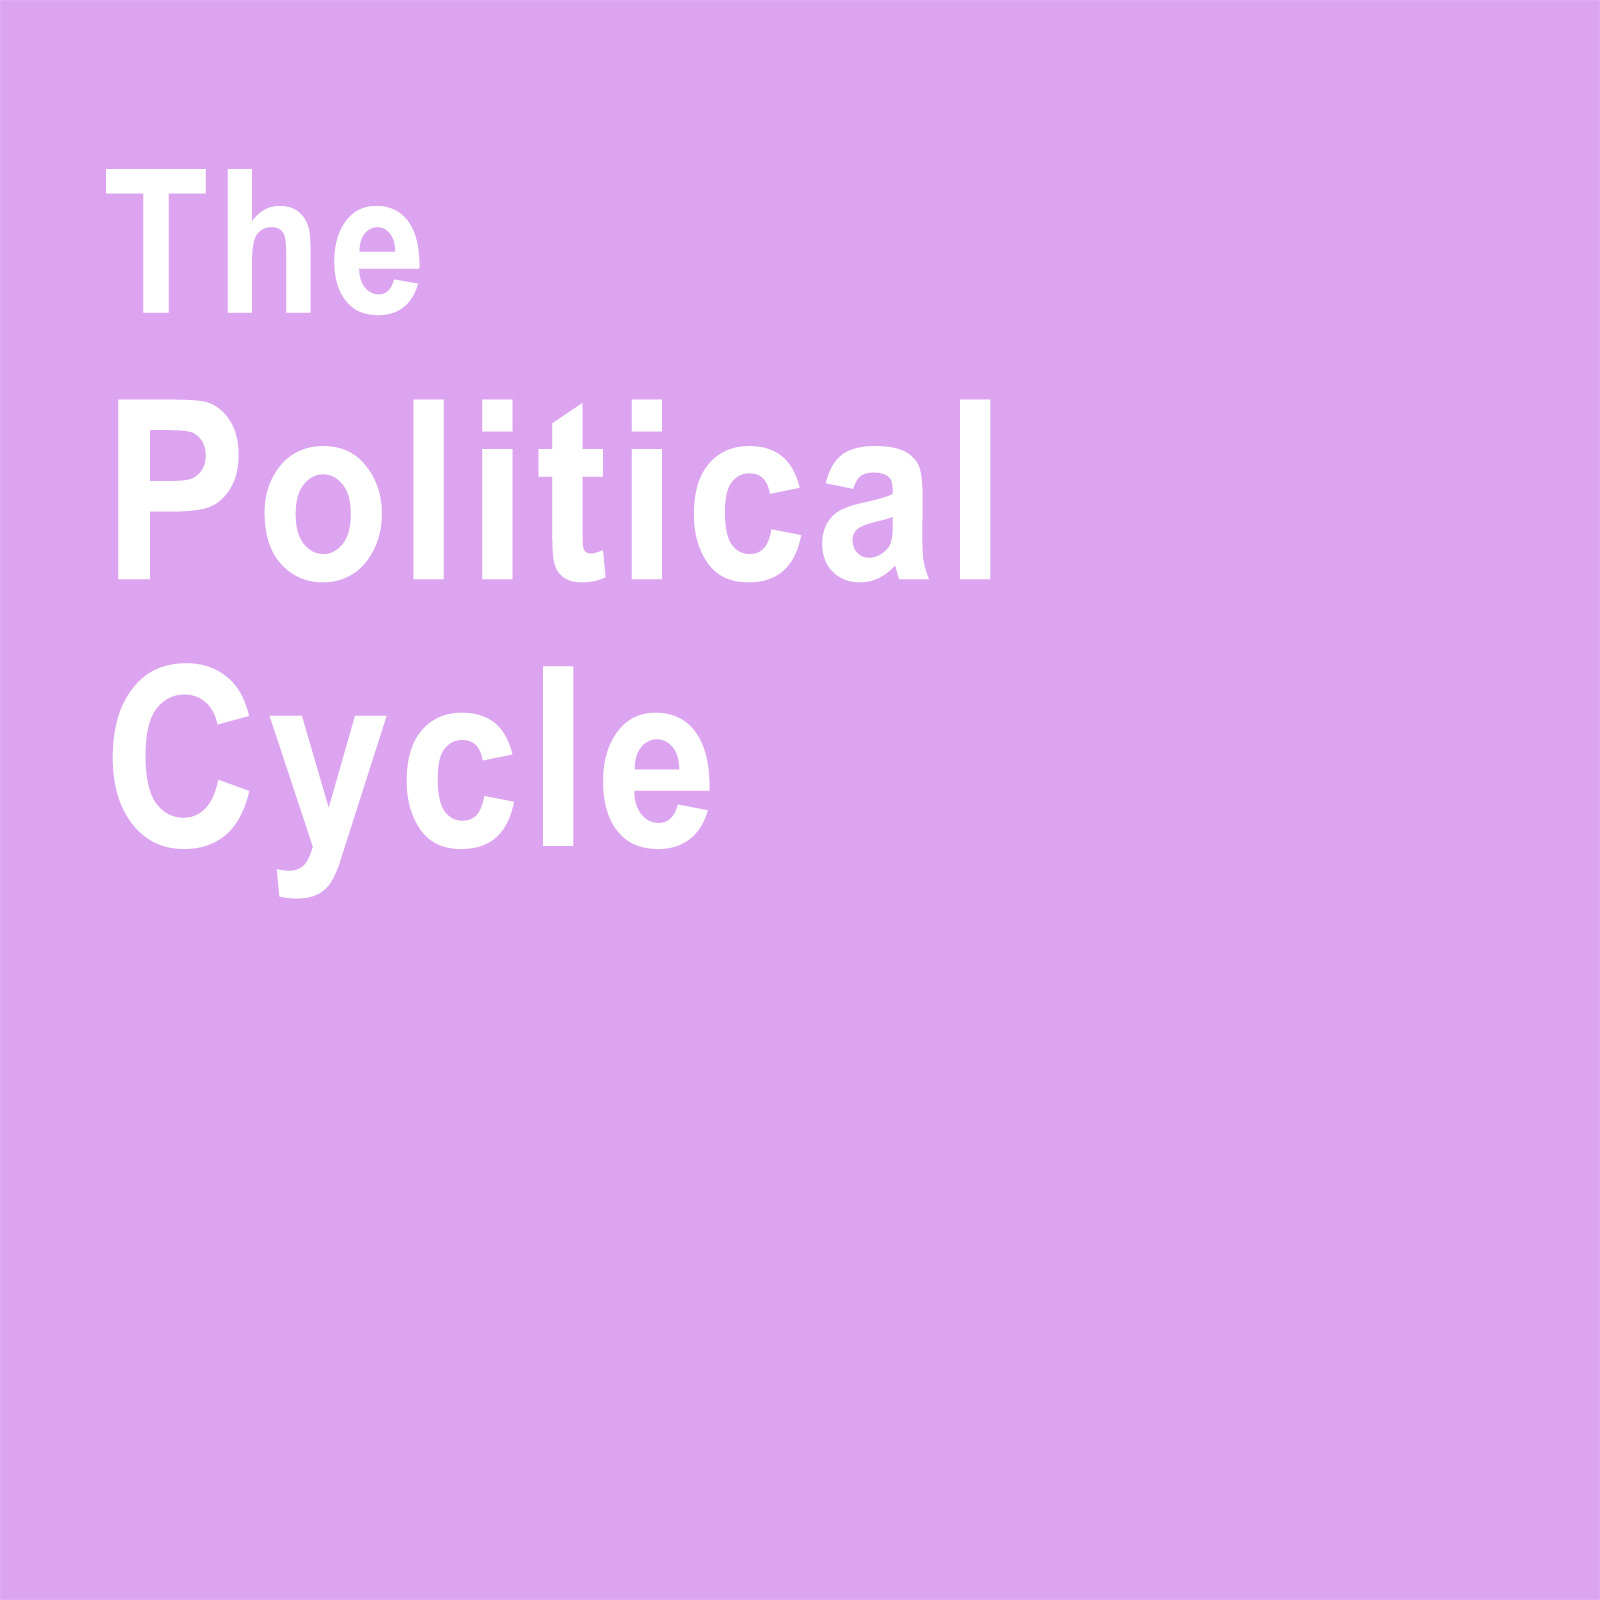 The Political Cycle